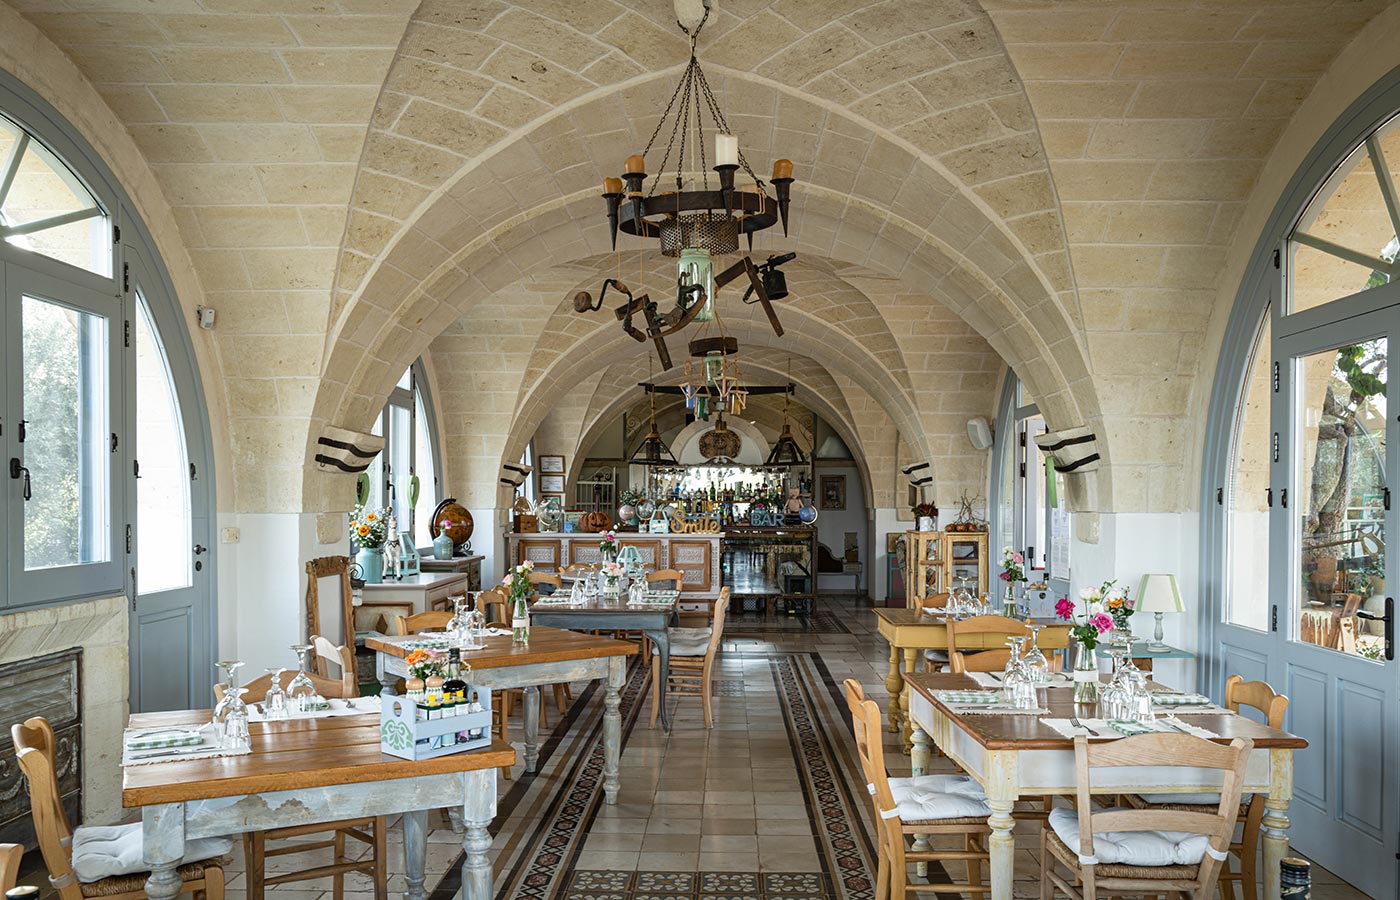 Restaurant in masseria with traditional cuisine of Puglia | © Gianni Buonsante Photography